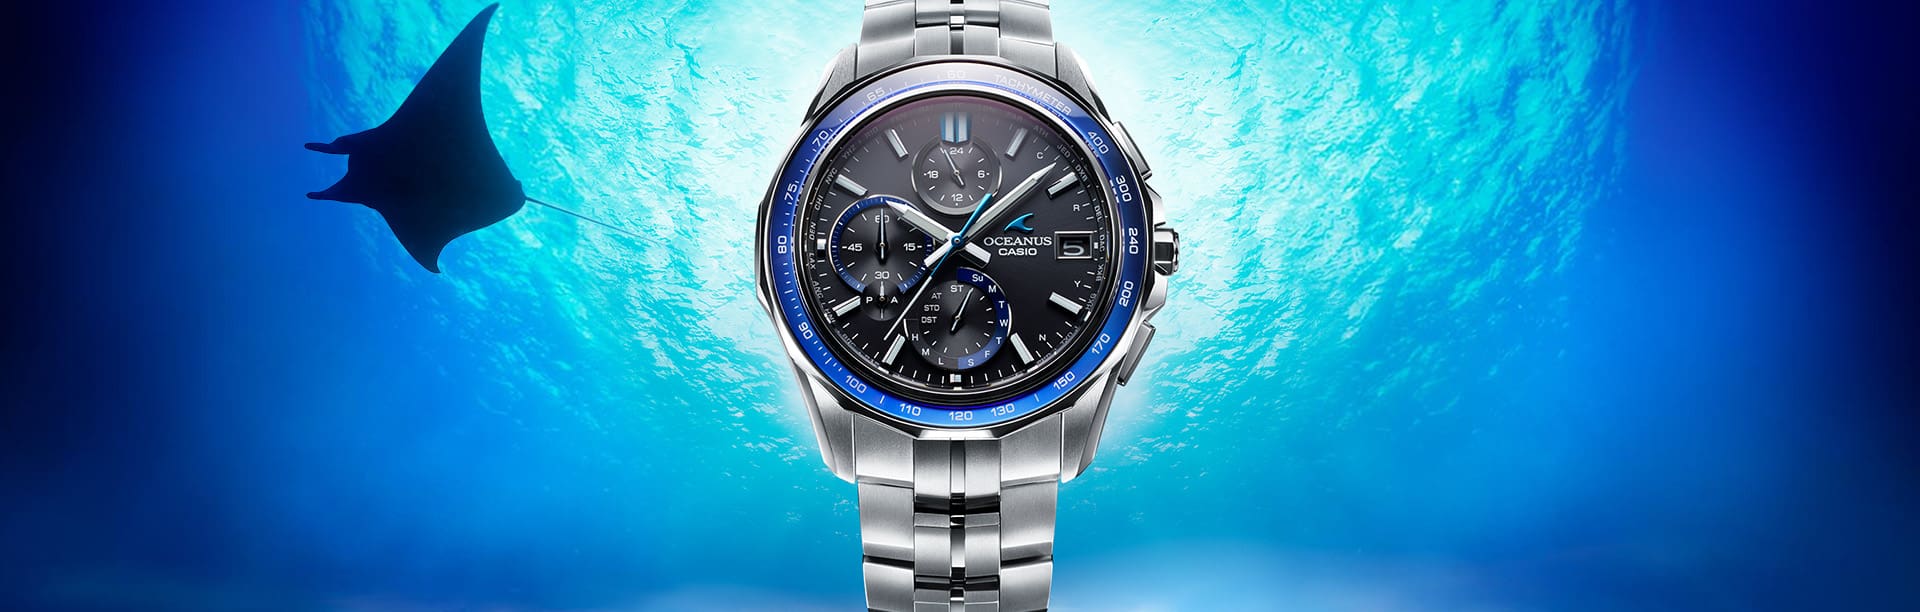 Blue OCEANUS OCWS7000 Analog watch in an under water setting with Sea Ray